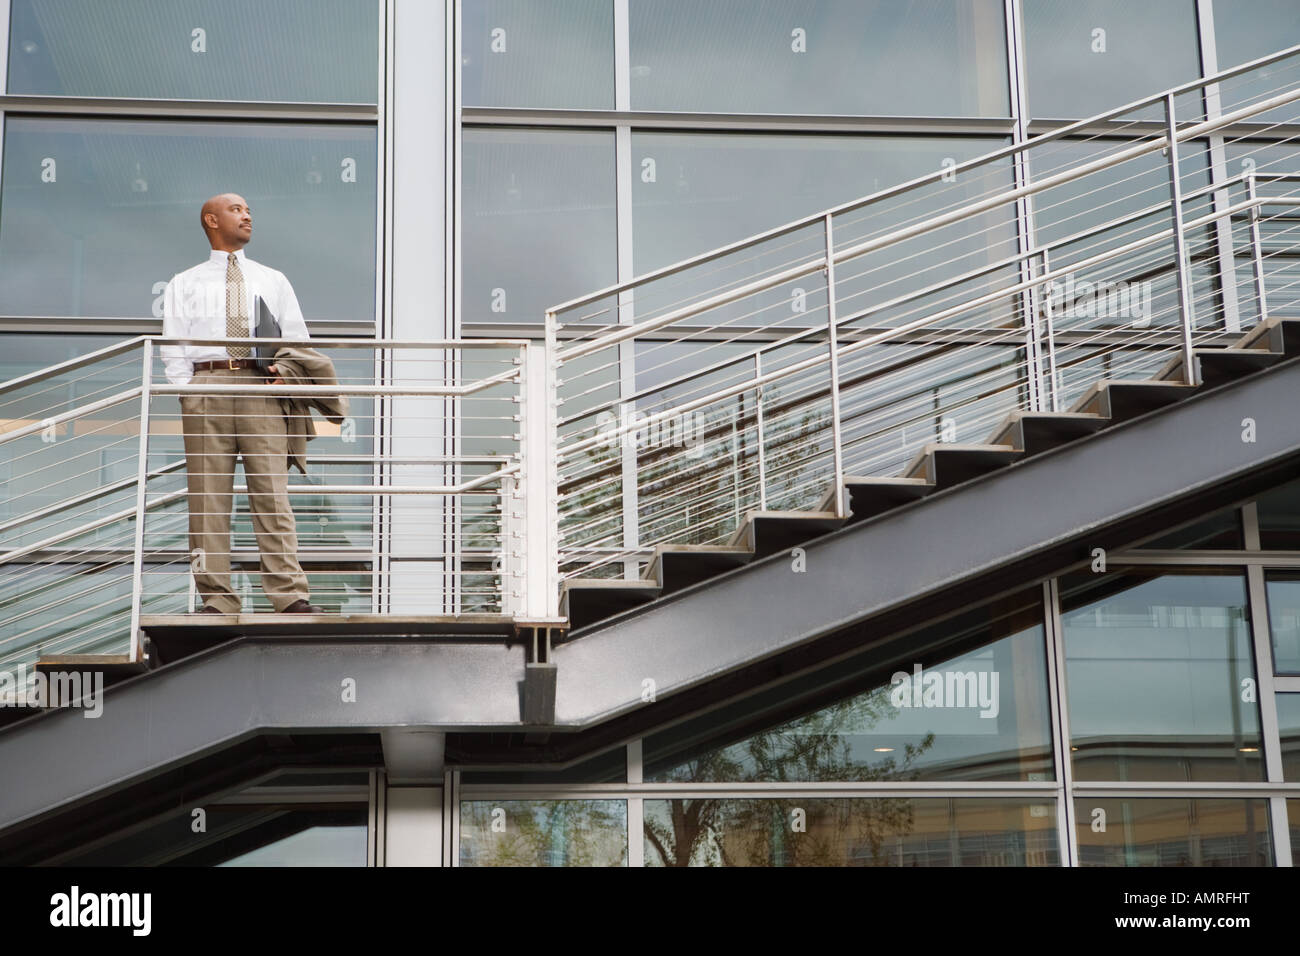 African businessman standing on outdoor staircase Stock Photo